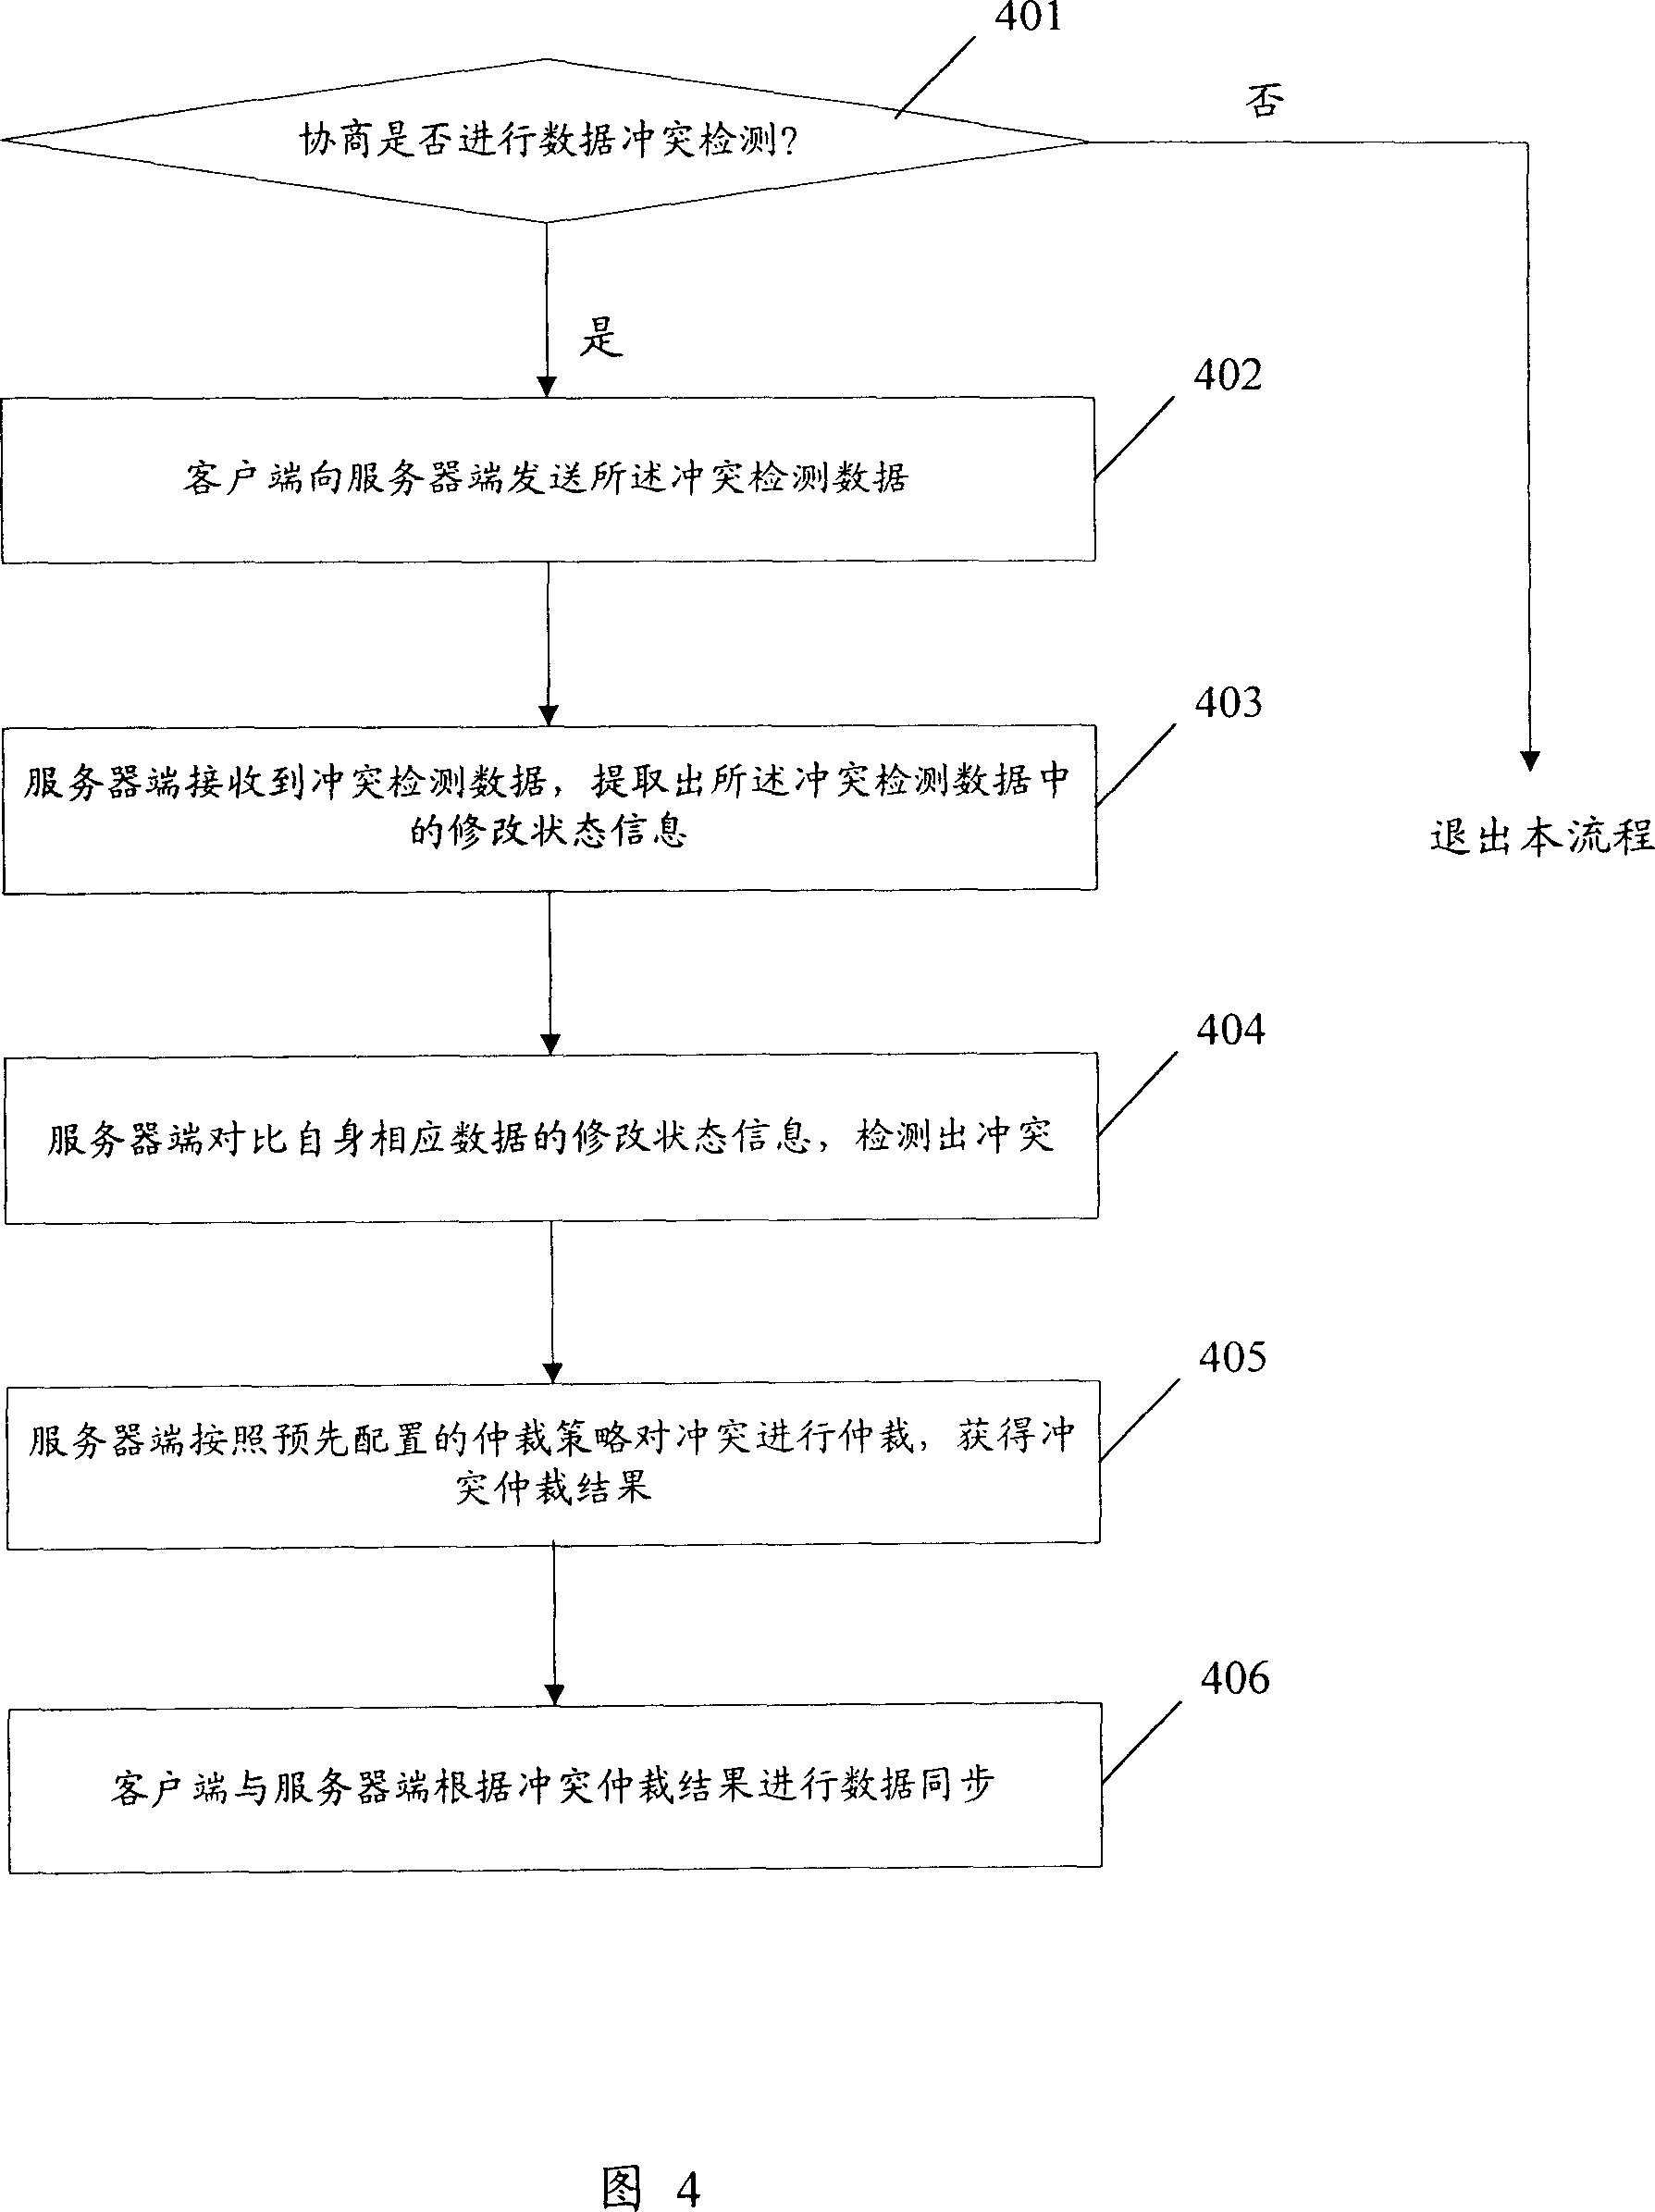 Realizing method for detecting and resolving data synchronous conflict